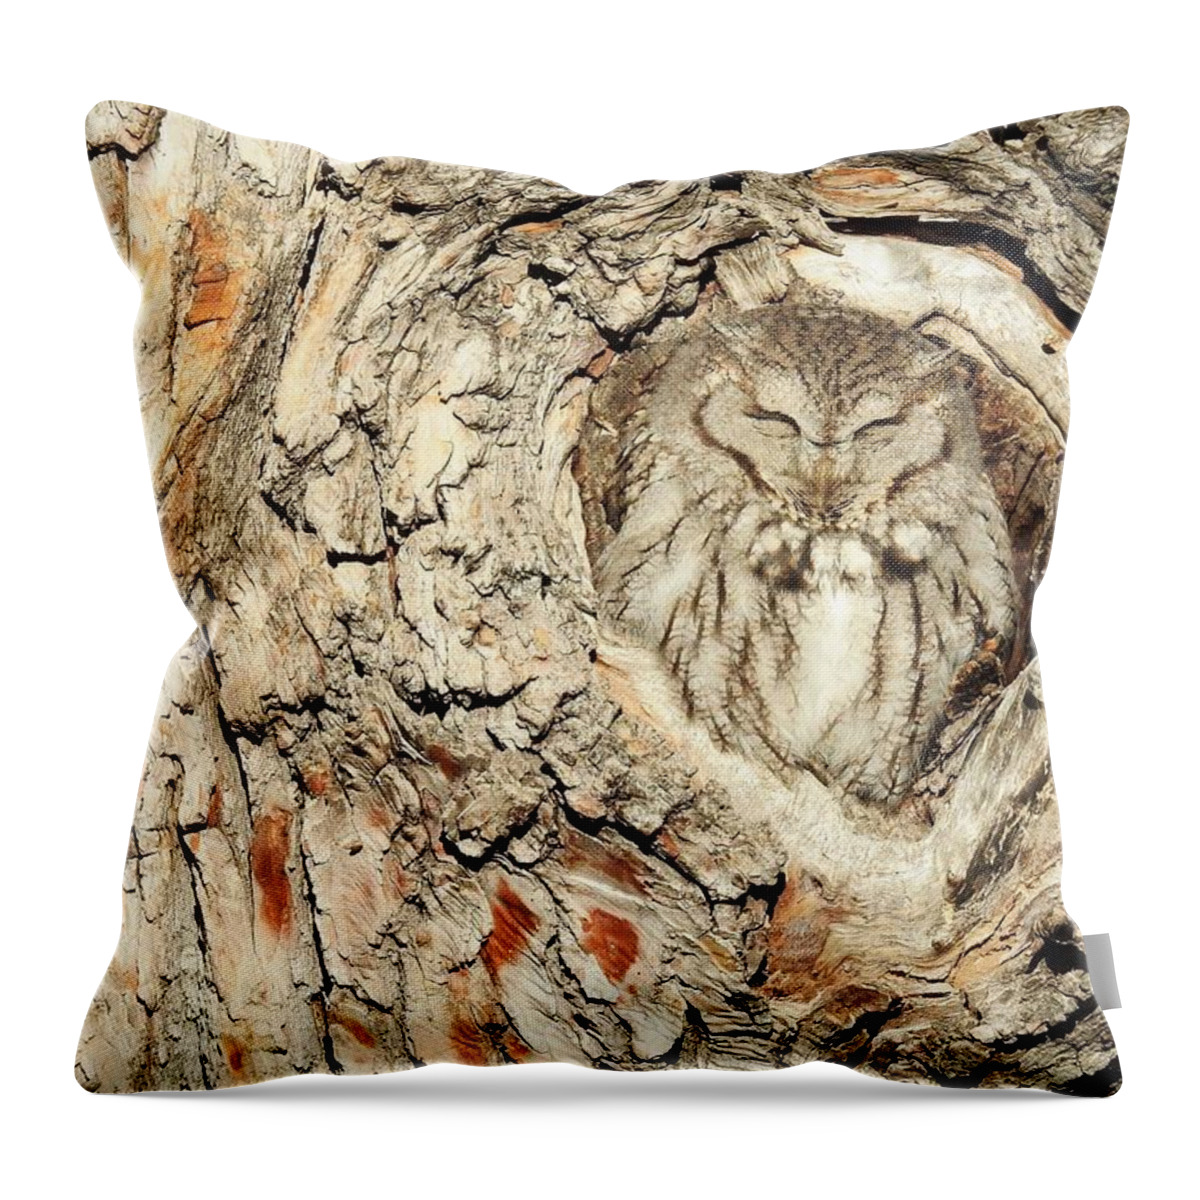 Owl Throw Pillow featuring the photograph Sleeping In by Nicole Belvill